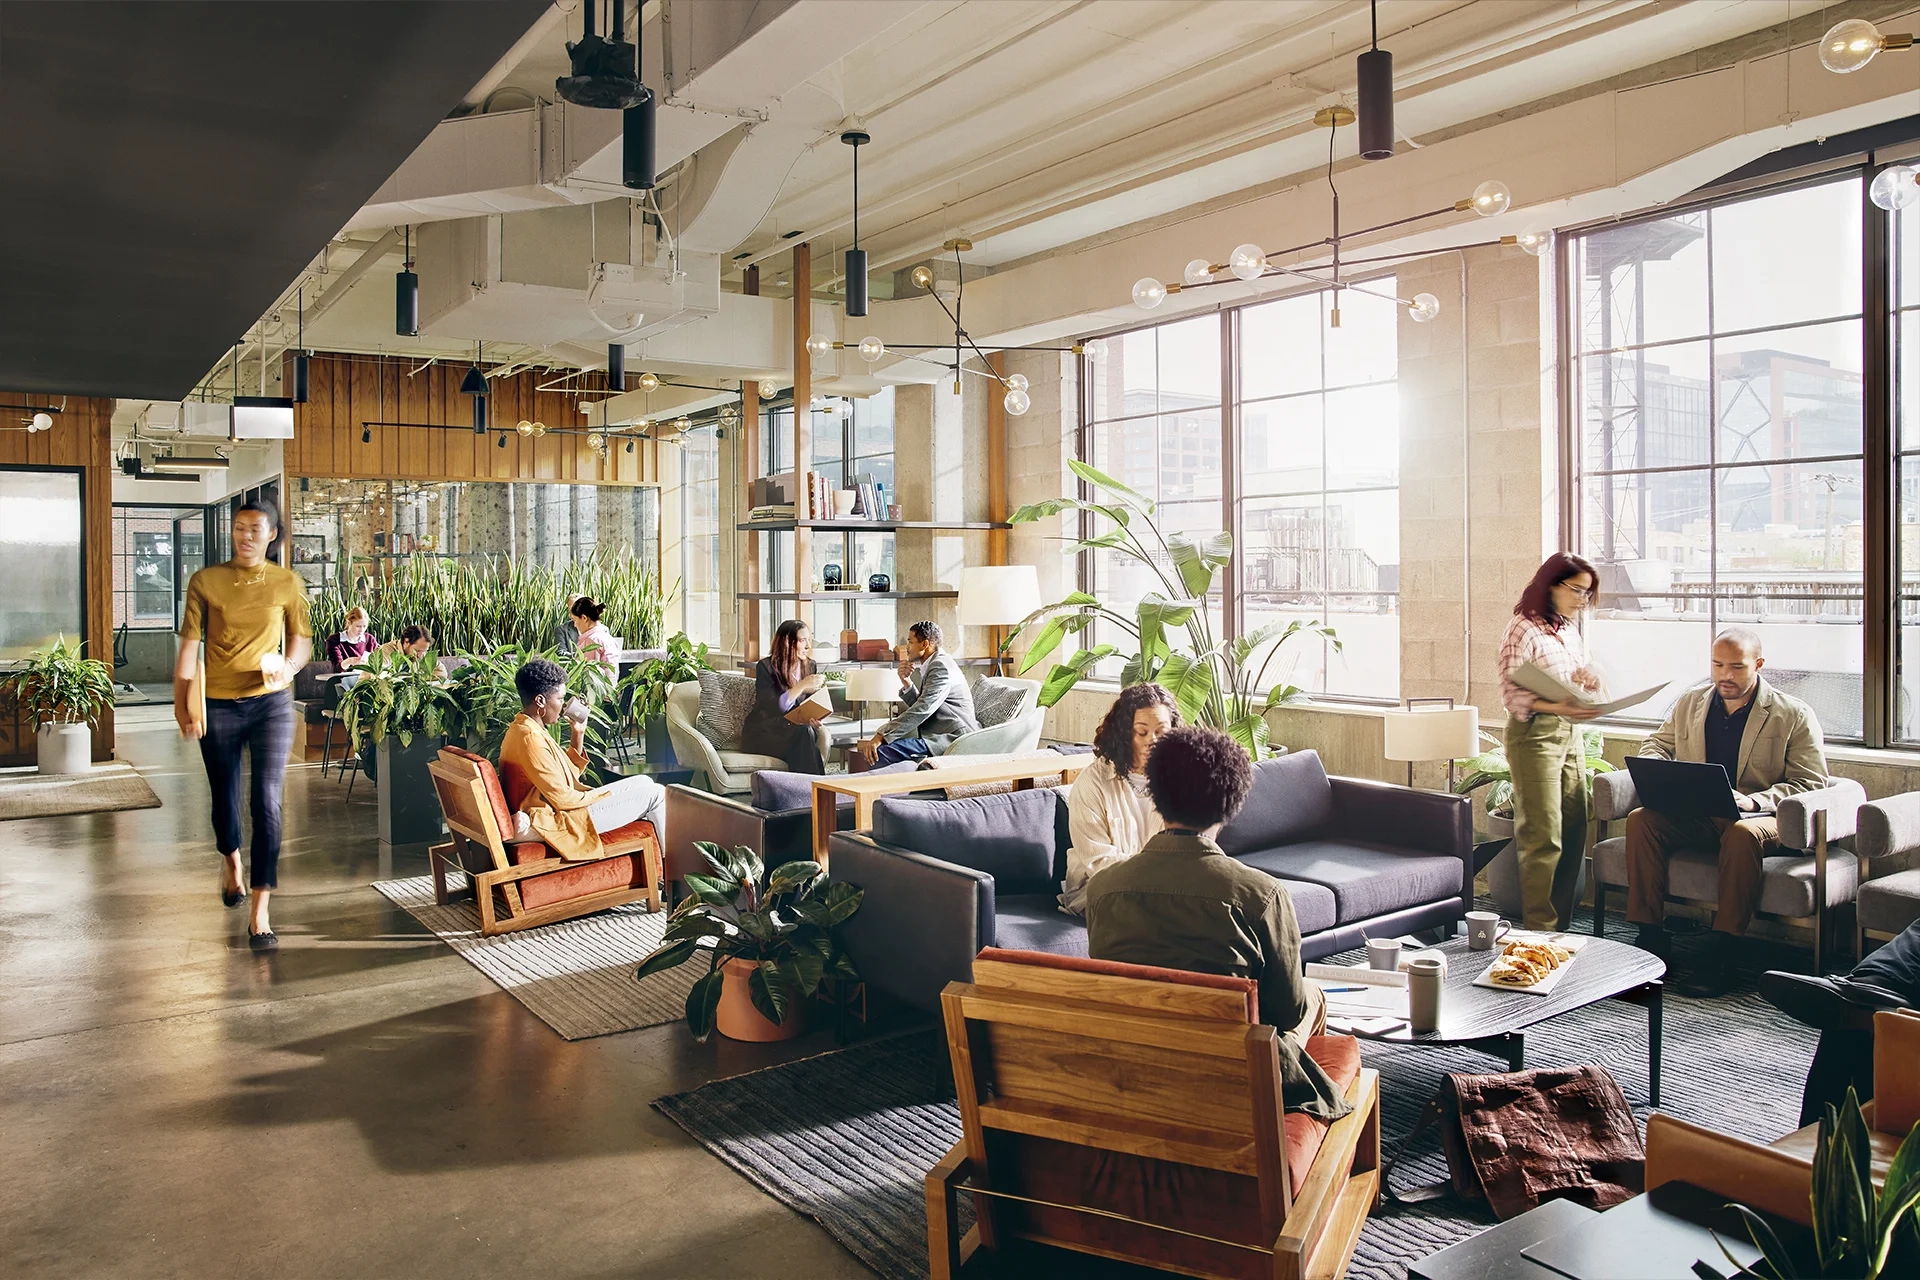 Coworking space with people